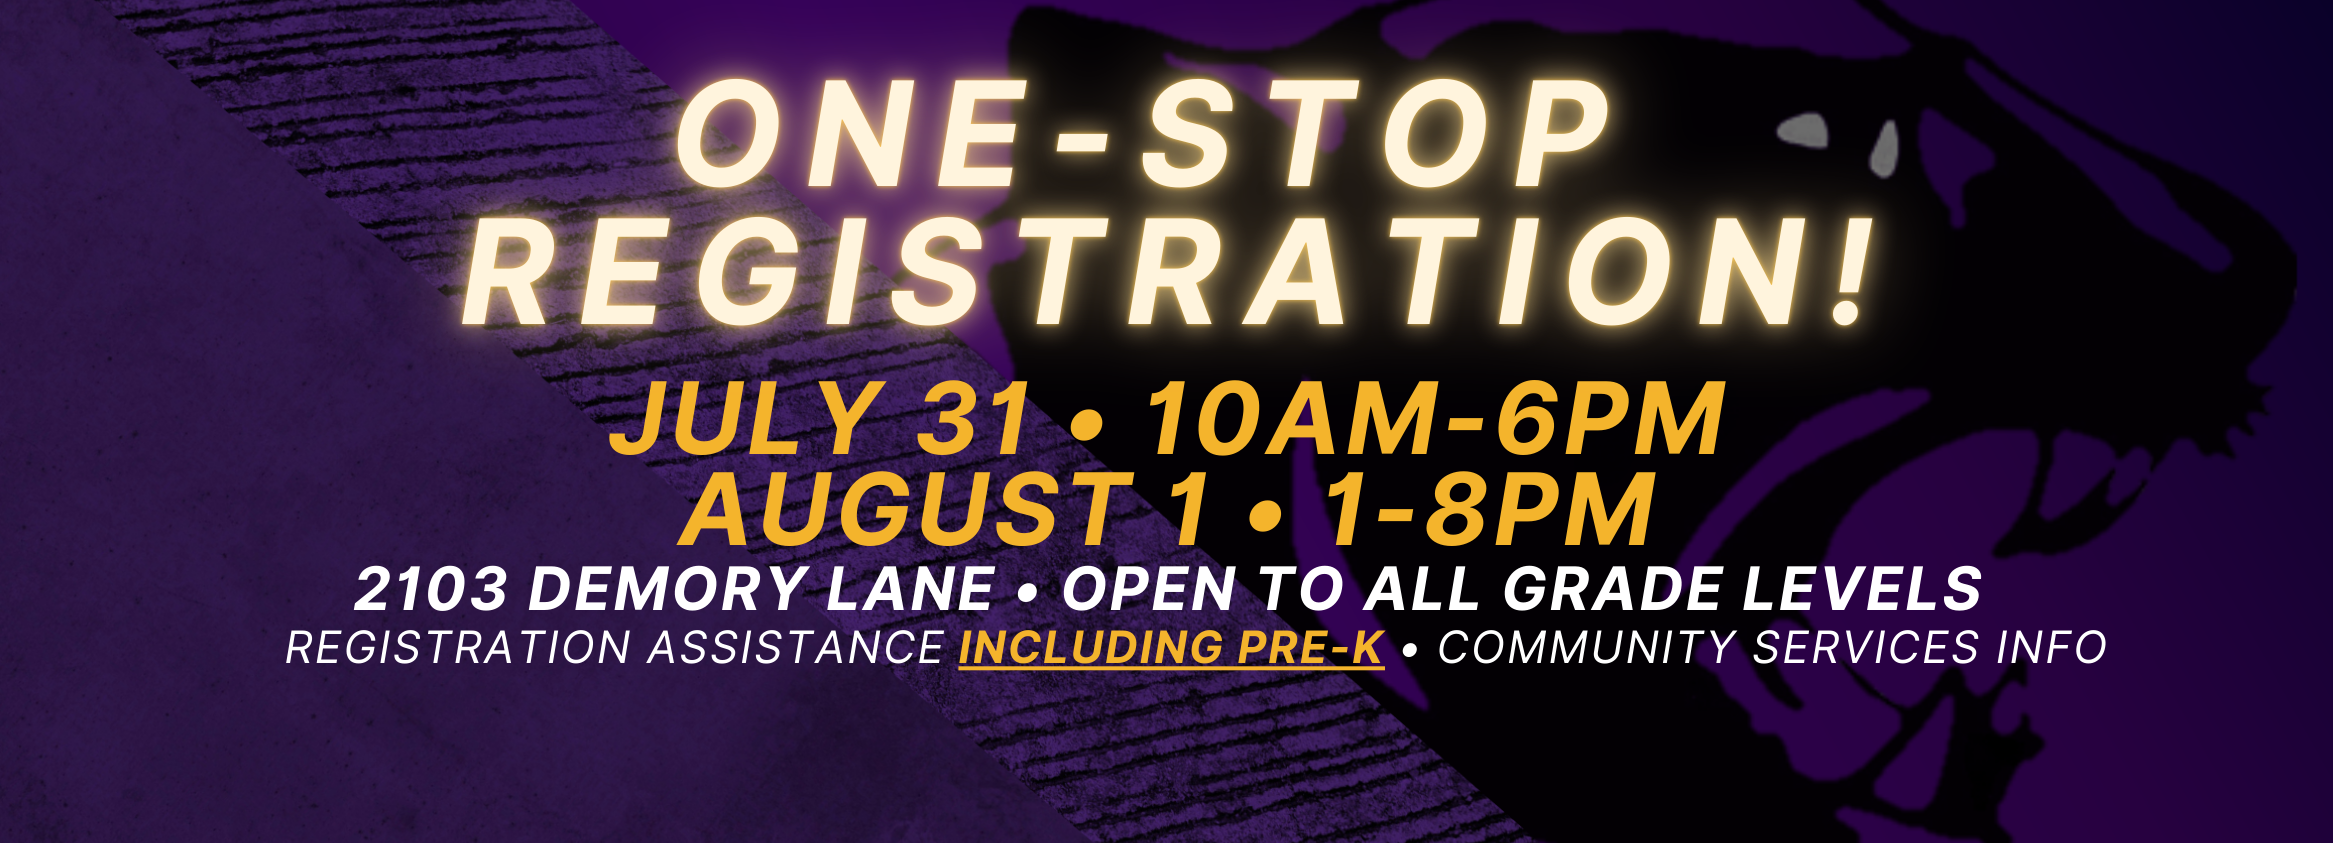 one-stop  registration! July 31 • 10AM-6PM August 1 • 1-8PM 2103 Demory Lane • Open to All grade levels     Registration assistance including pre-K • community services info